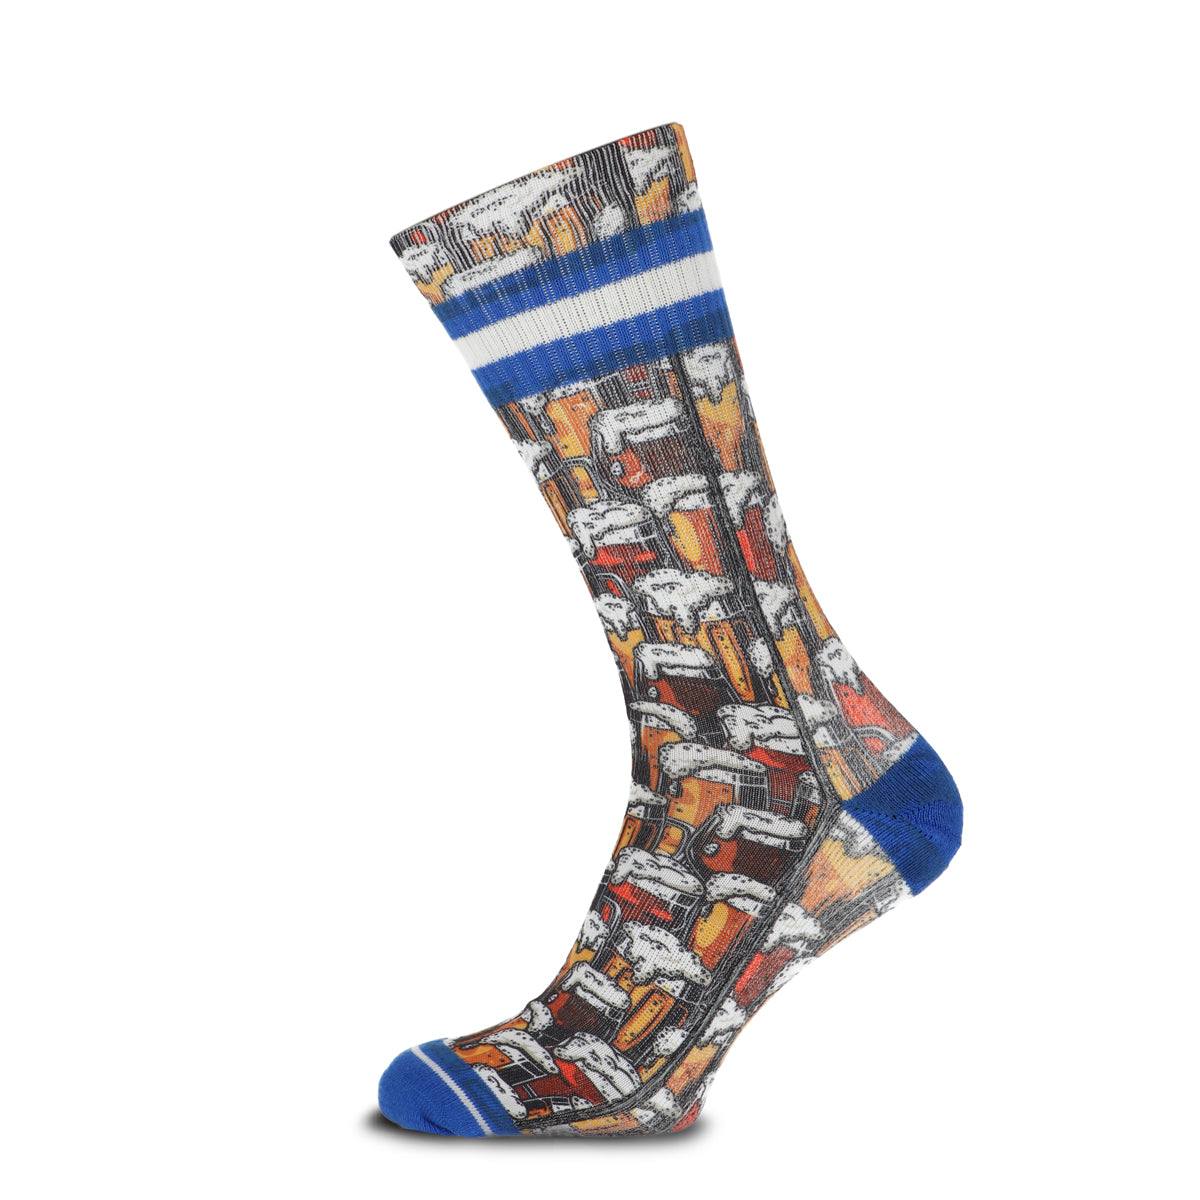 Hail to the Ale chaussettes pour hommes